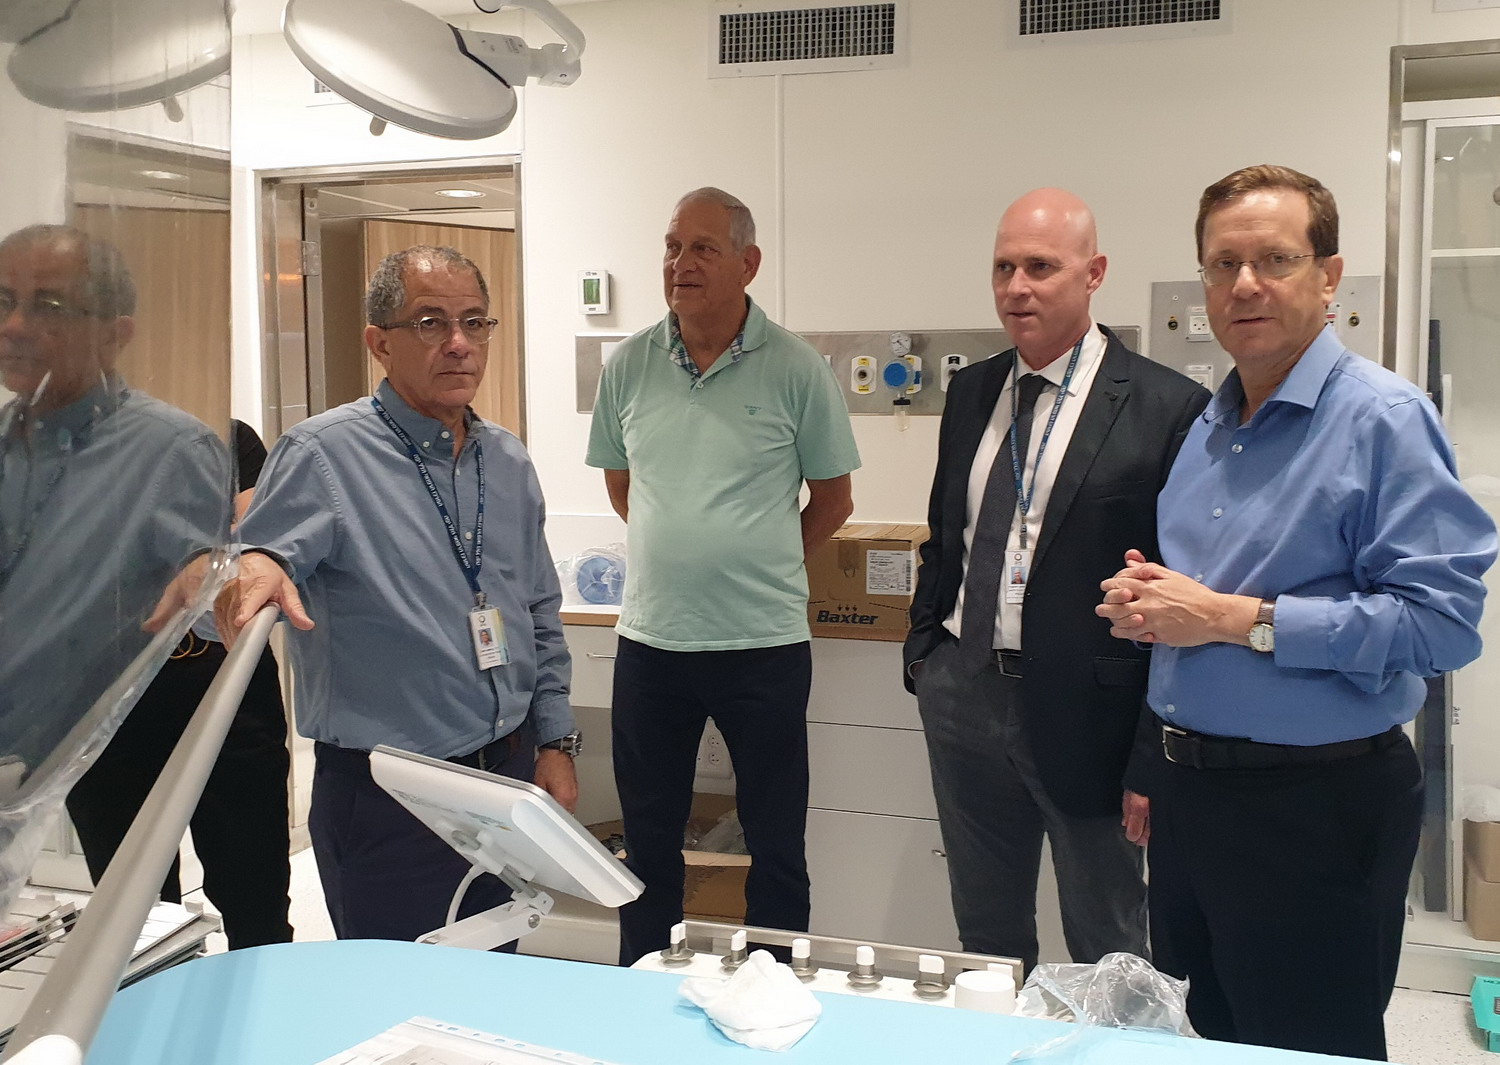 From right to left: Chairman of the Jewish Agency for Israel, Mr. Isaac (Bougie) Herzog; Director of the Hillel Yaffe Medical Center, Dr. Mickey Dudkiewicz; Chairman, Friends of Hillel Yaffe Medical Center, Mr. Moshe Morag, and the Administrative Director, Dr. Amnon Ben Moshe in the area of the new cardiac catheterization rooms